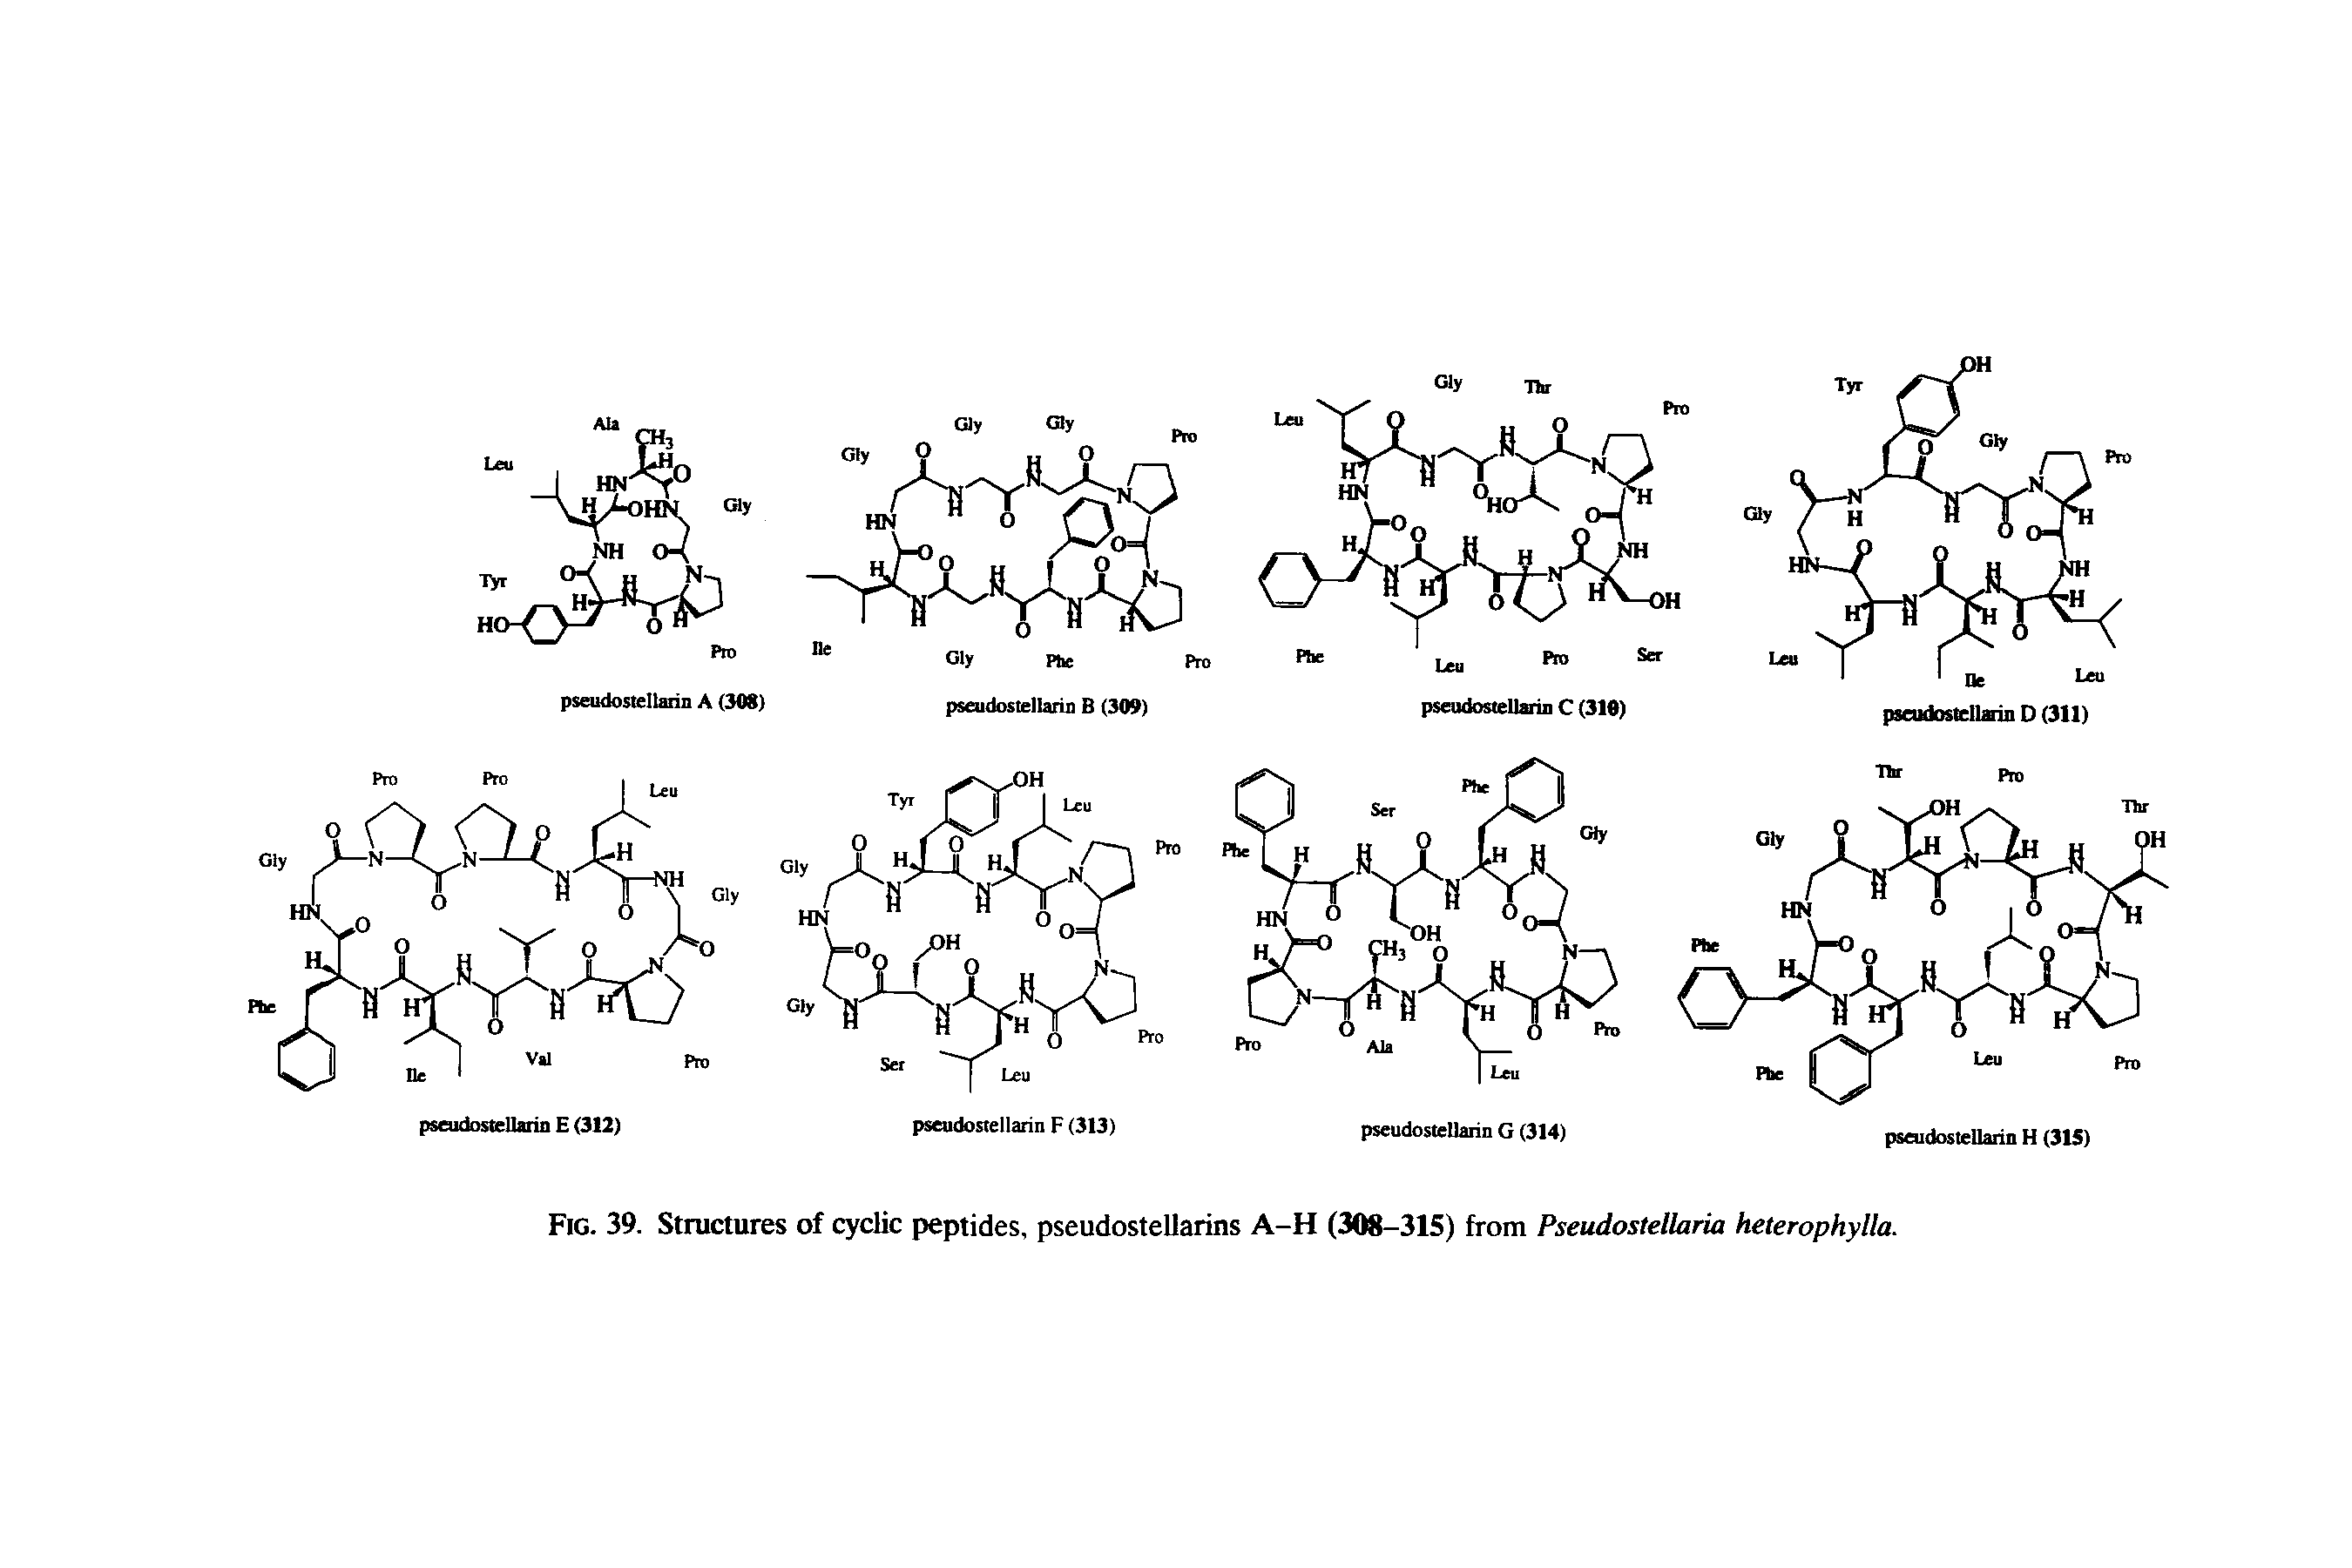 Fig. 39. Structures of cyclic peptides, pseudostellarins A-H (308-315) from Pseudostellaria heterophylla.